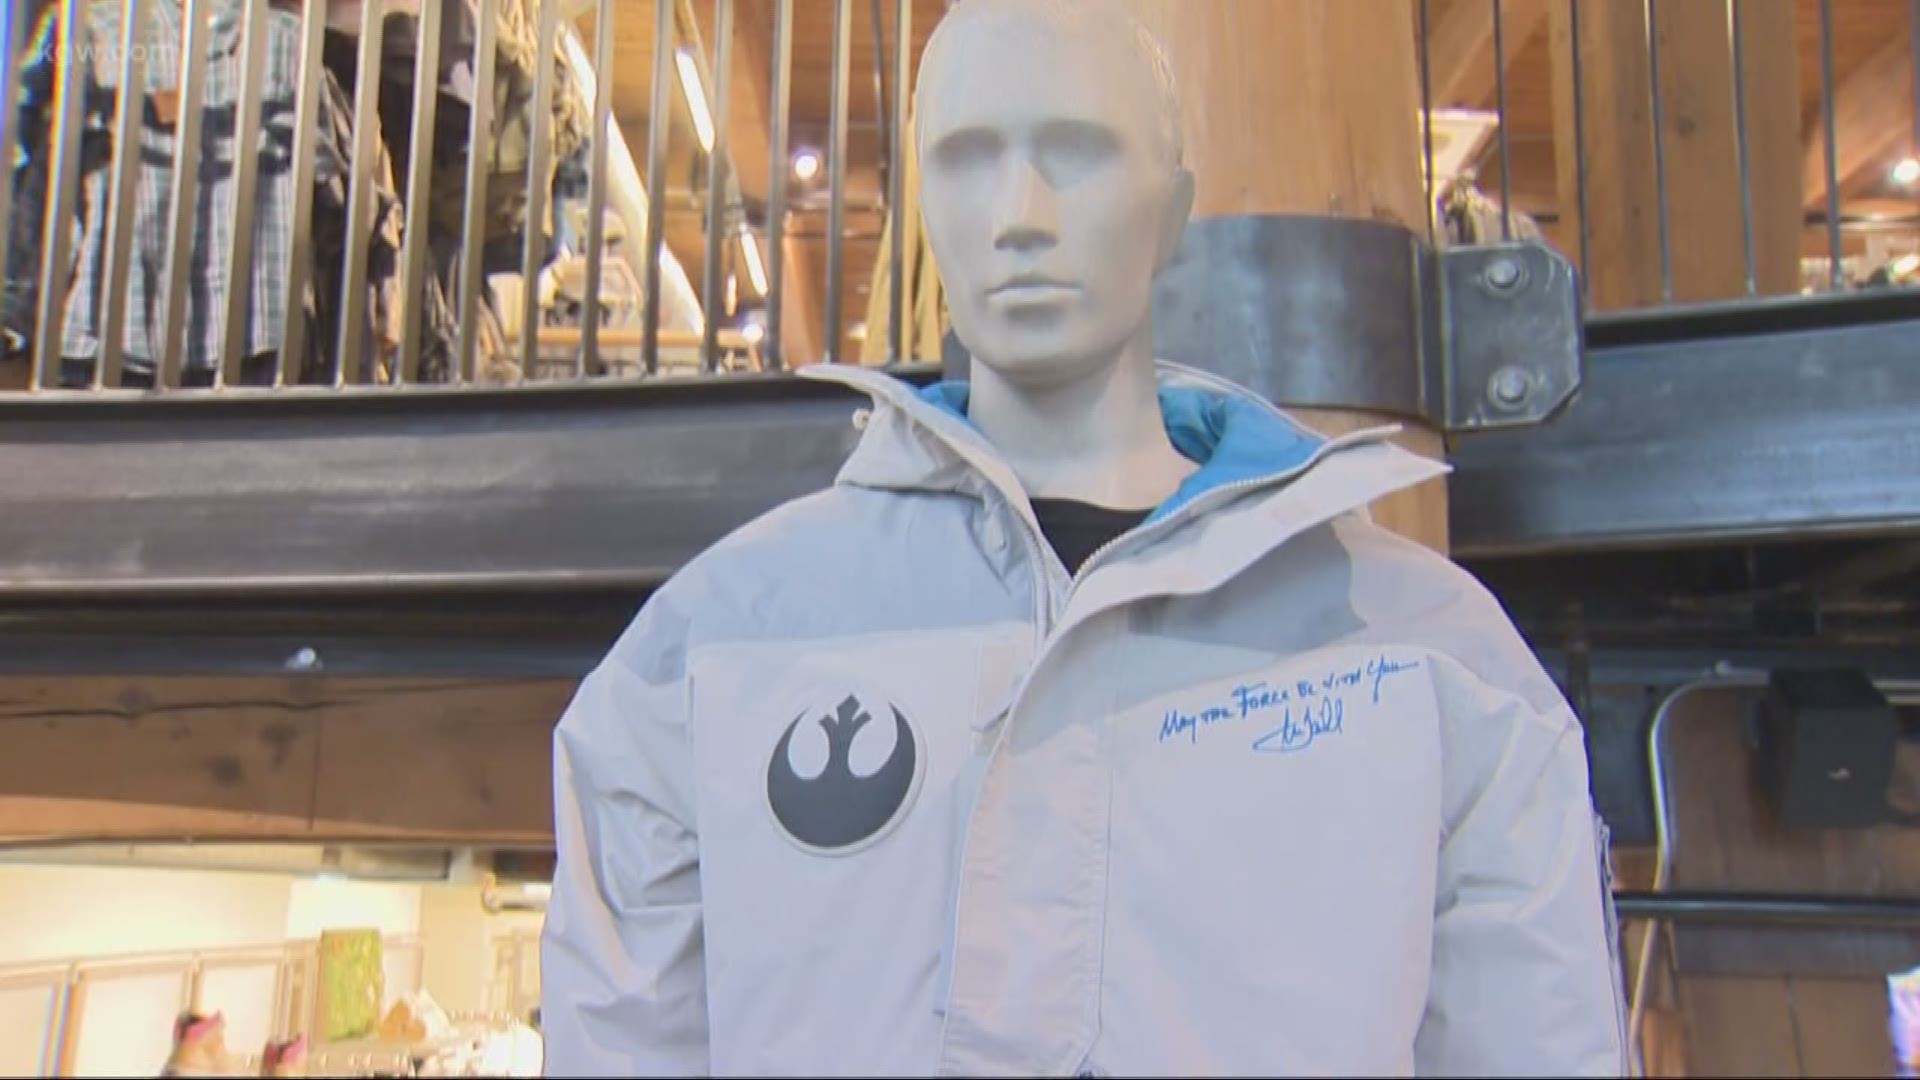 Columbia sportswear is capitalizing on the upcoming star wars movie by giving fans a Challenger Jacket. Some were signed by Mark Hamill.